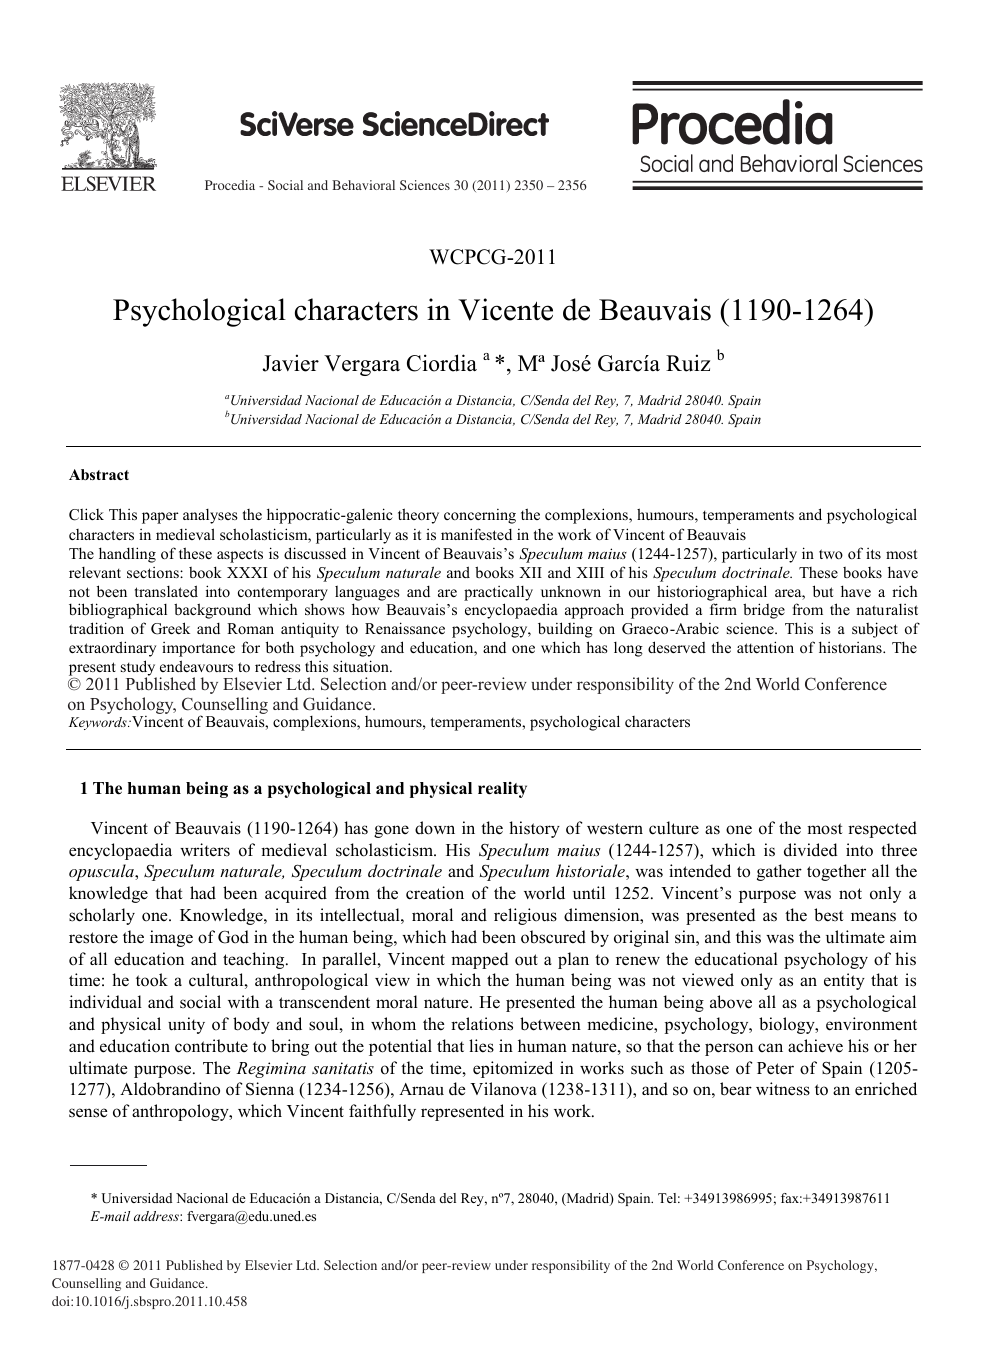 Psychological Characters In Vicente De Beauvais 1190 1264 Topic Of Research Paper In Clinical Medicine Download Scholarly Article Pdf And Read For Free On Cyberleninka Open Science Hub